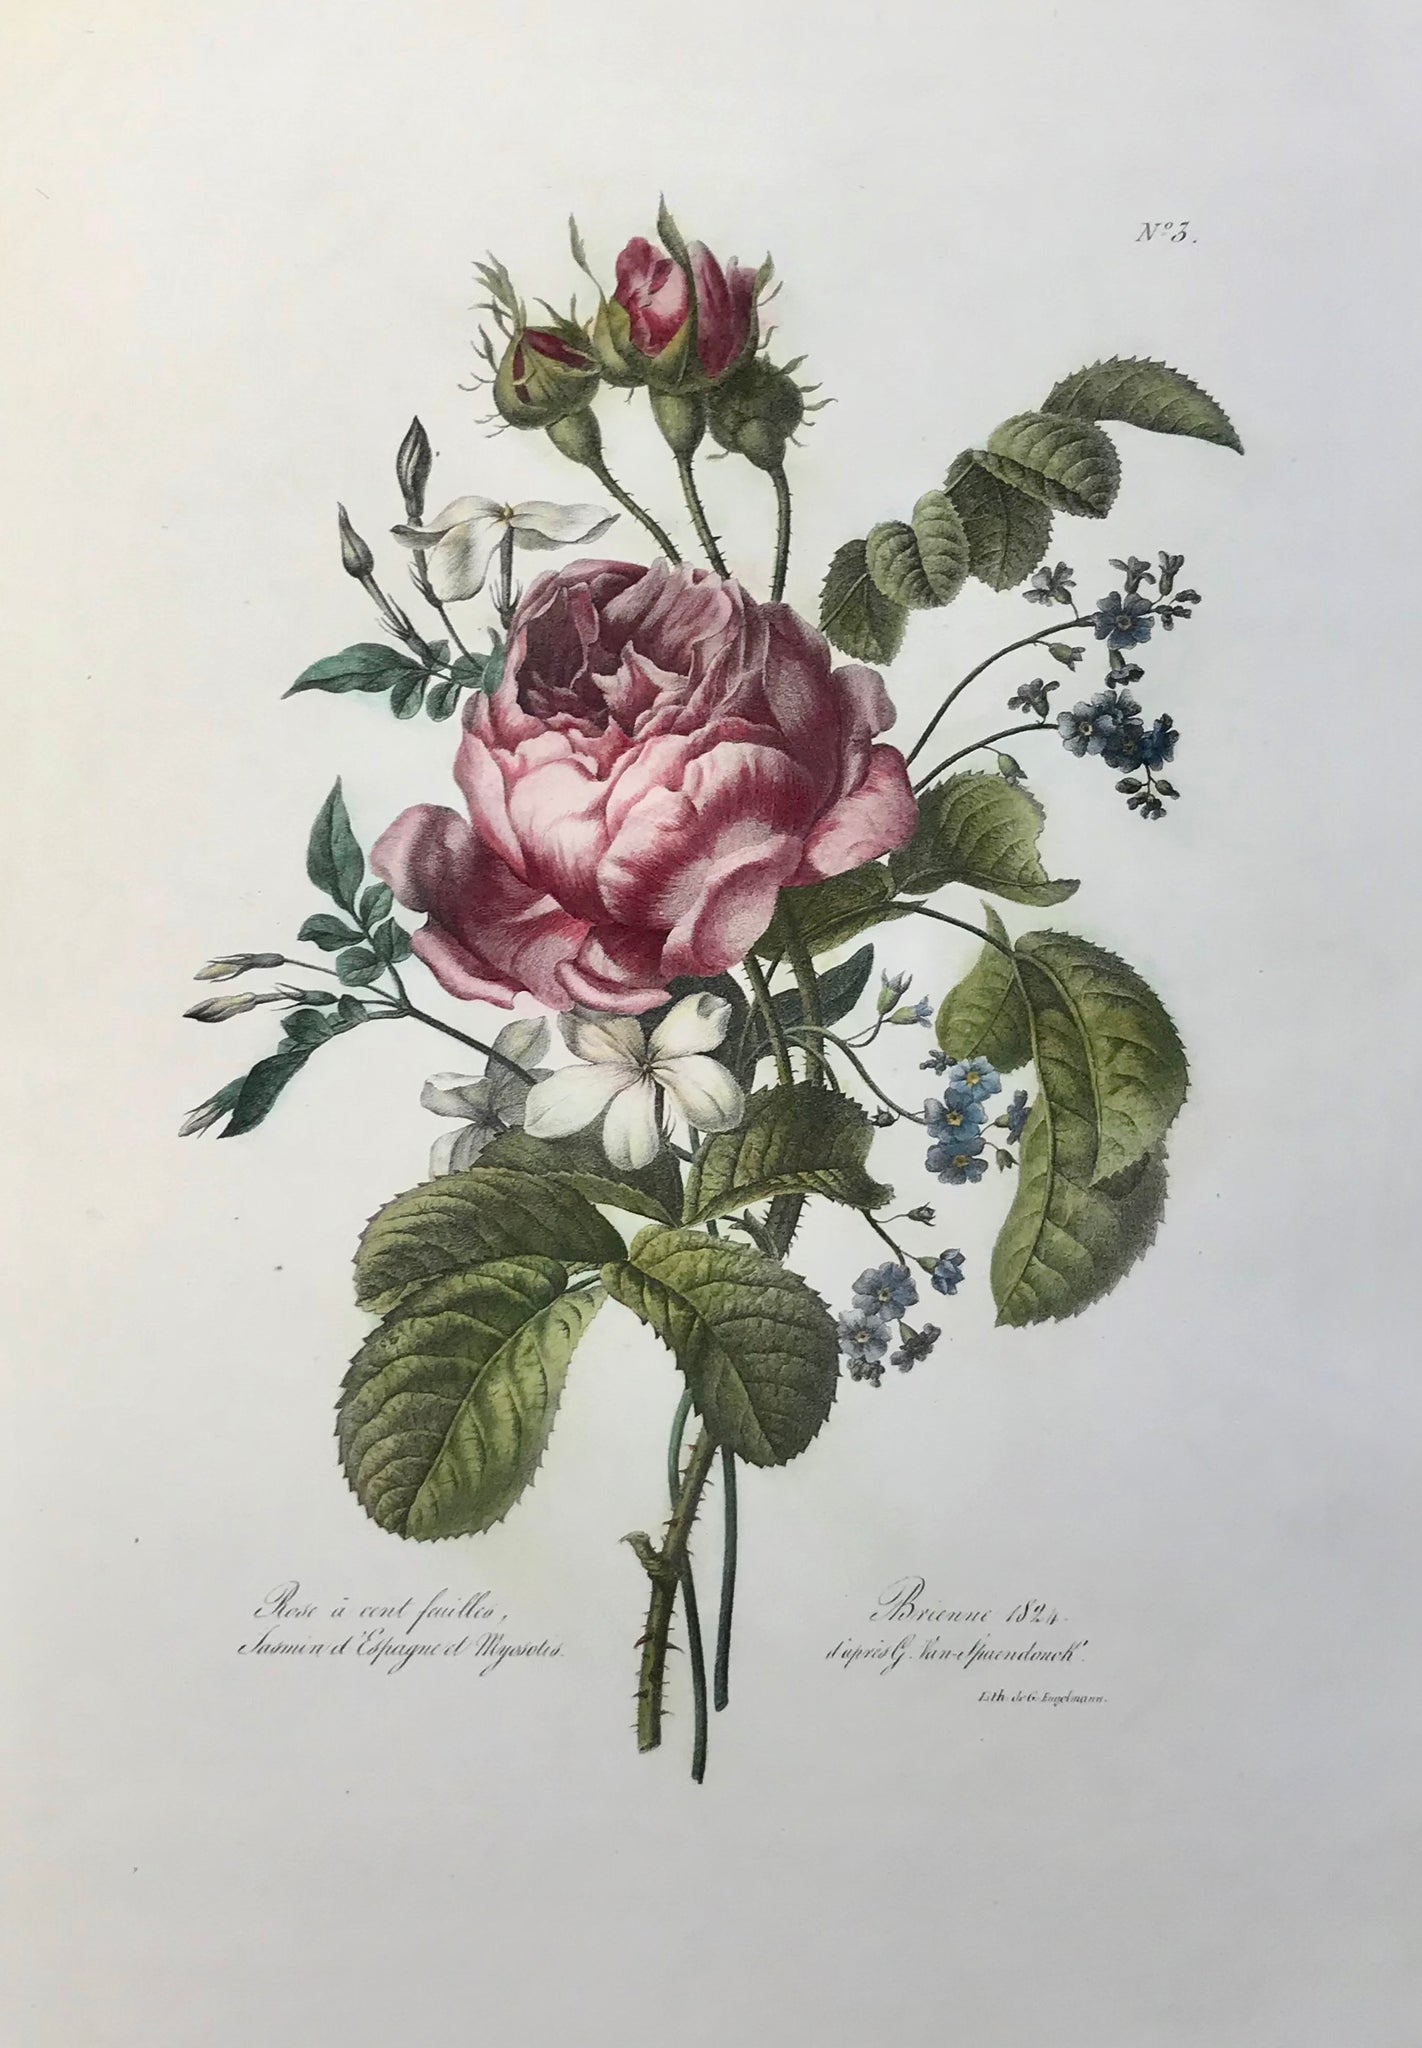 "Rose à cent feuilles - Jasmin d'Espagne et Myosotis"  A rose flower bouquet with a Centifolia-rose, Spanish jasmine and forgetmenot  Delightful lithograph by Gottfried (Godefroy) Engelmann (1788-1839)  After Gerard van Spaendonck (1746-1822)  Brienne, dated 1824  Very clean and very attractive. Minimal restored faults in margins.  Sheet size 36 x 26 cm (ca. 14.2 x 10.2")  $ 950.00  Order Nr. EXCLUSIVE249238